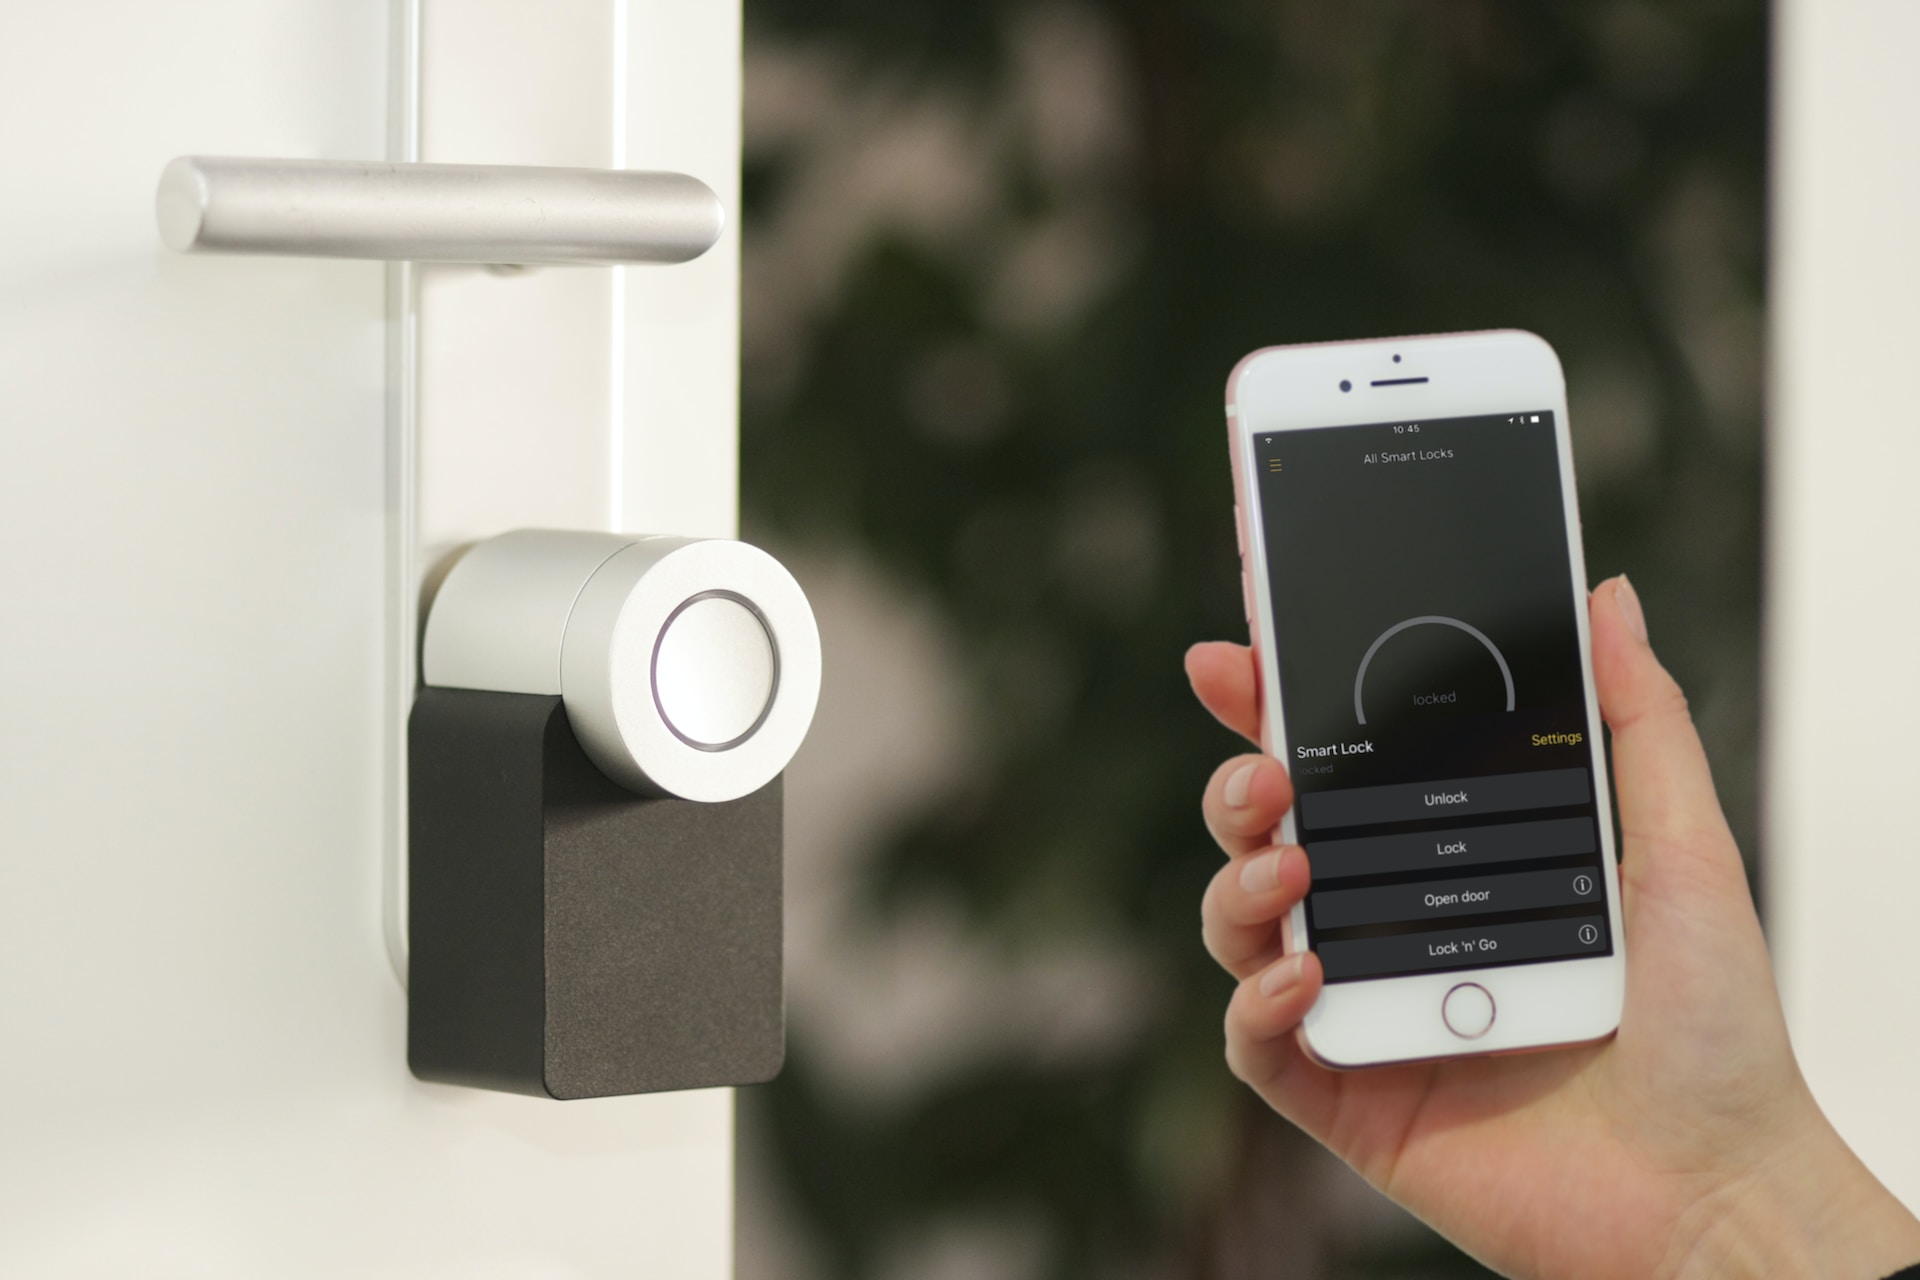 A photo of a smart lock on a door with someone holding a smartphone to unlock it.